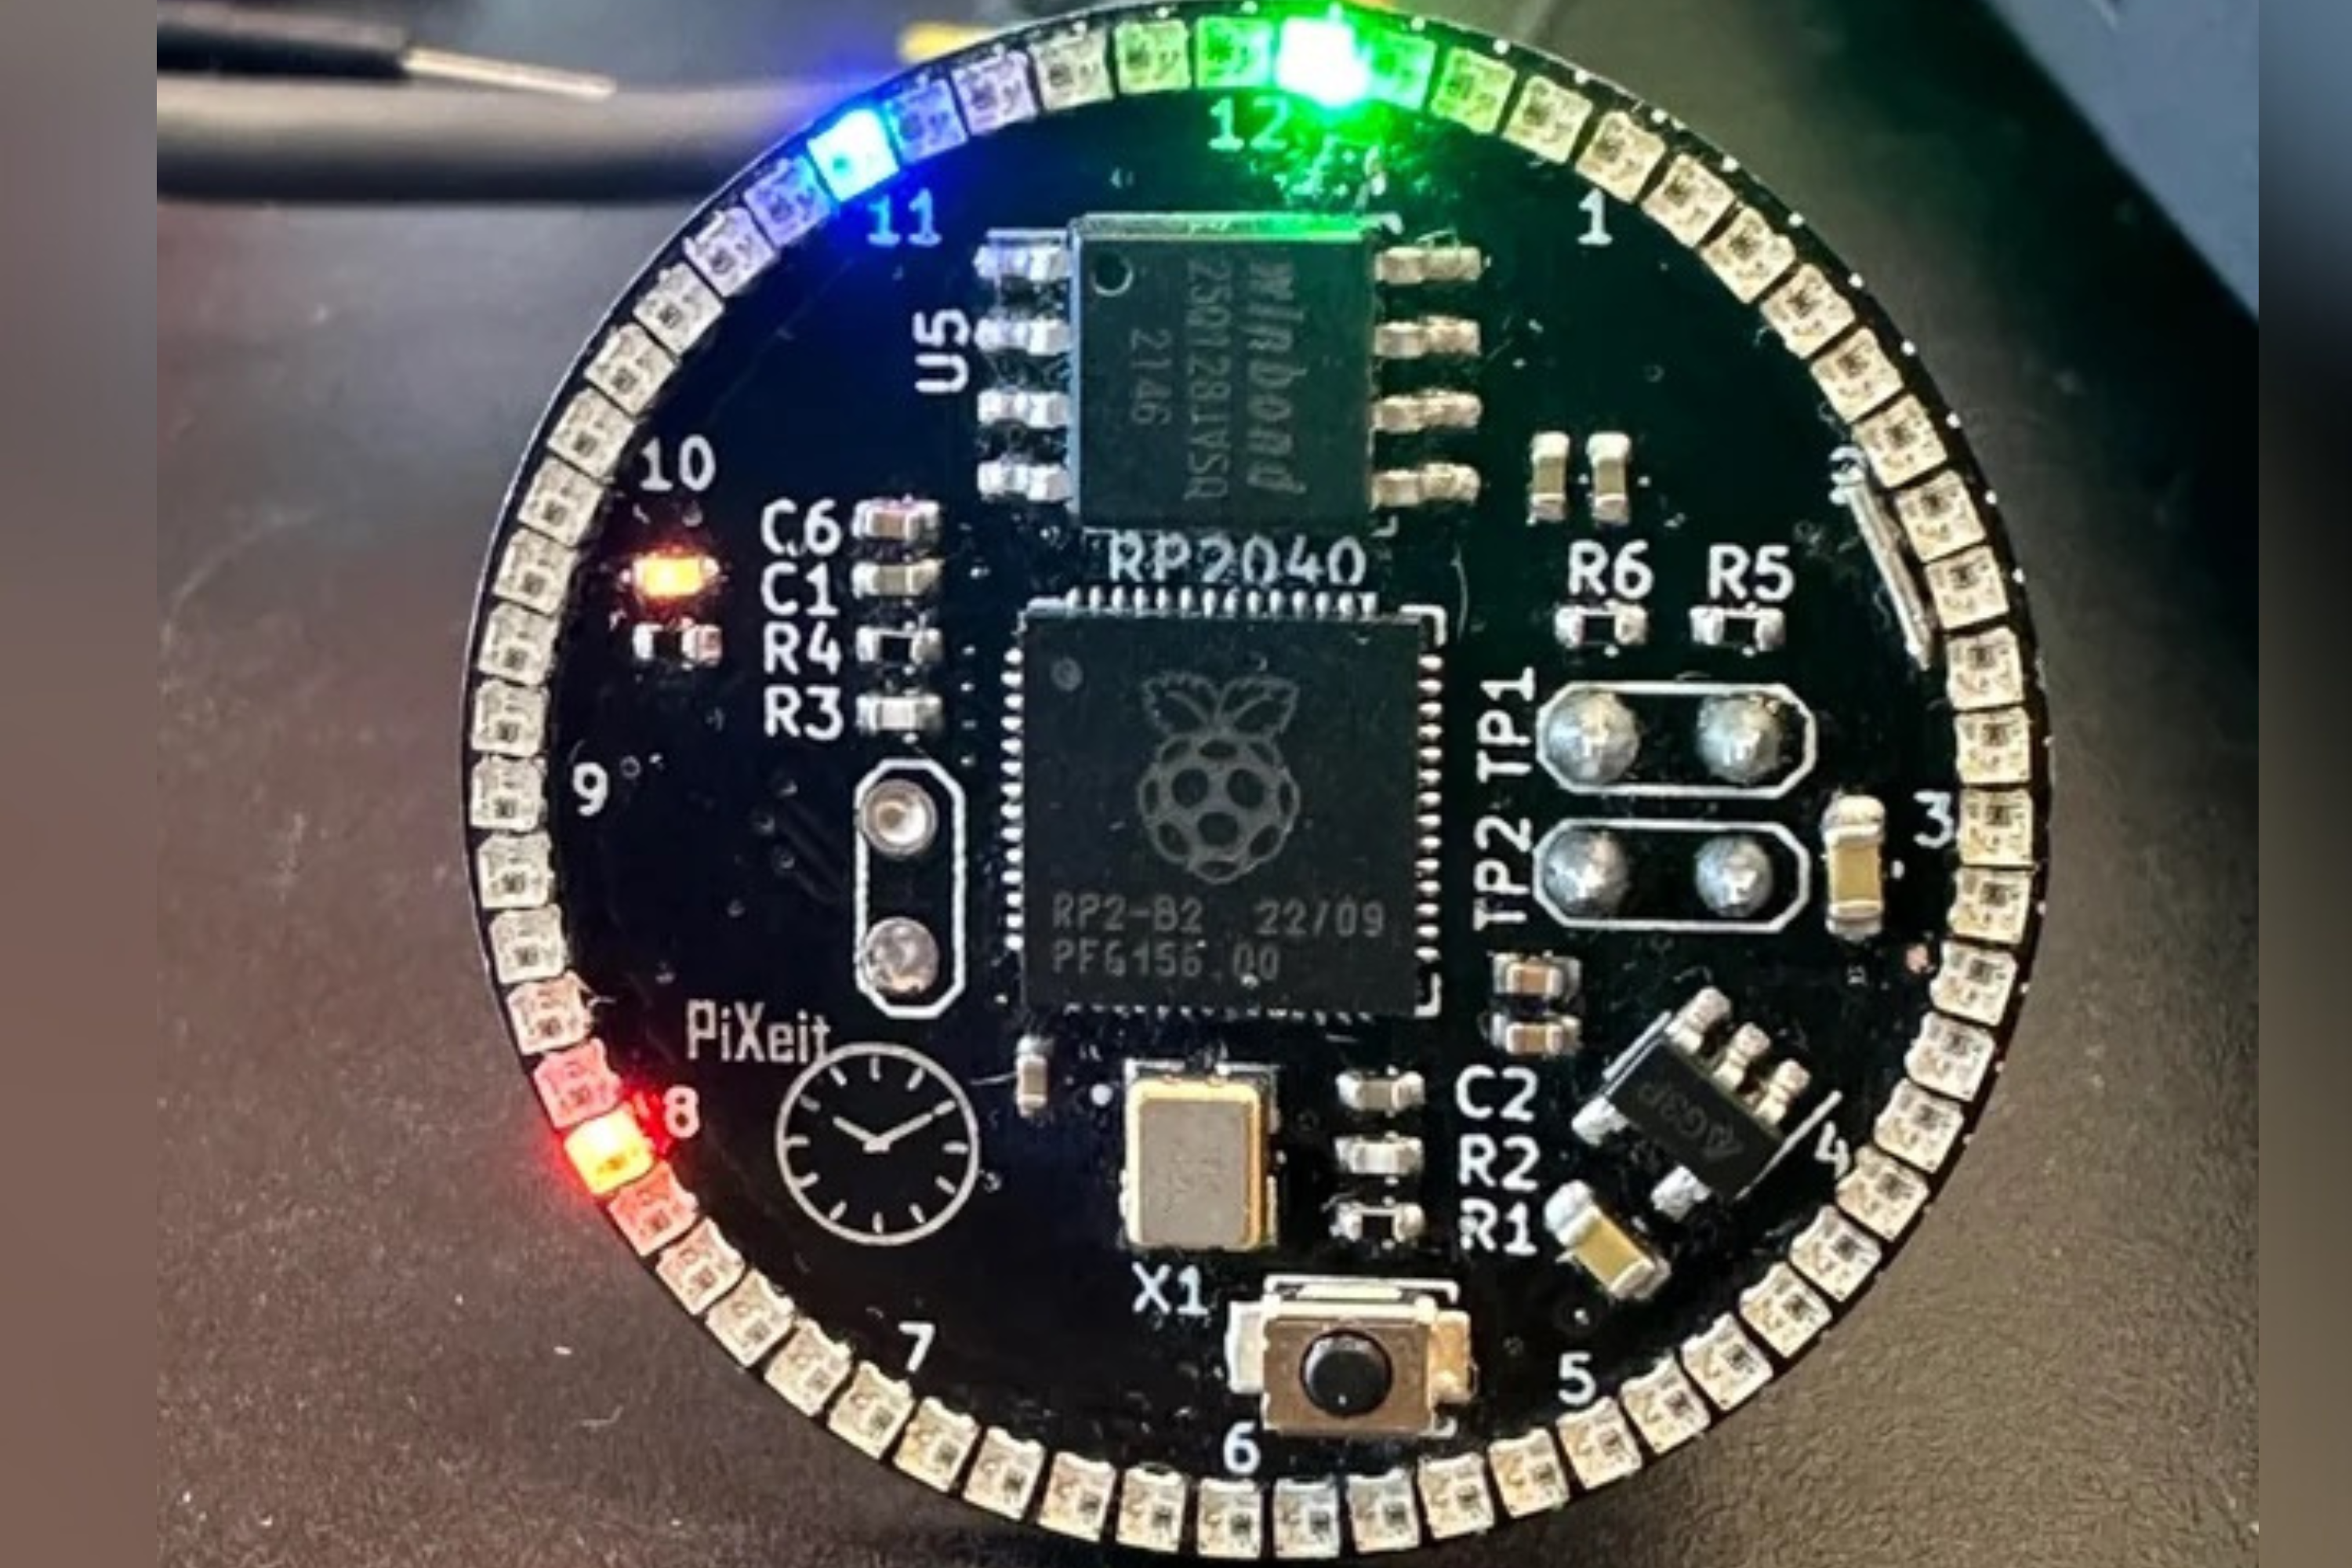 This awesome watch uses LEDs to tell time and is powered by a Raspberry Pi